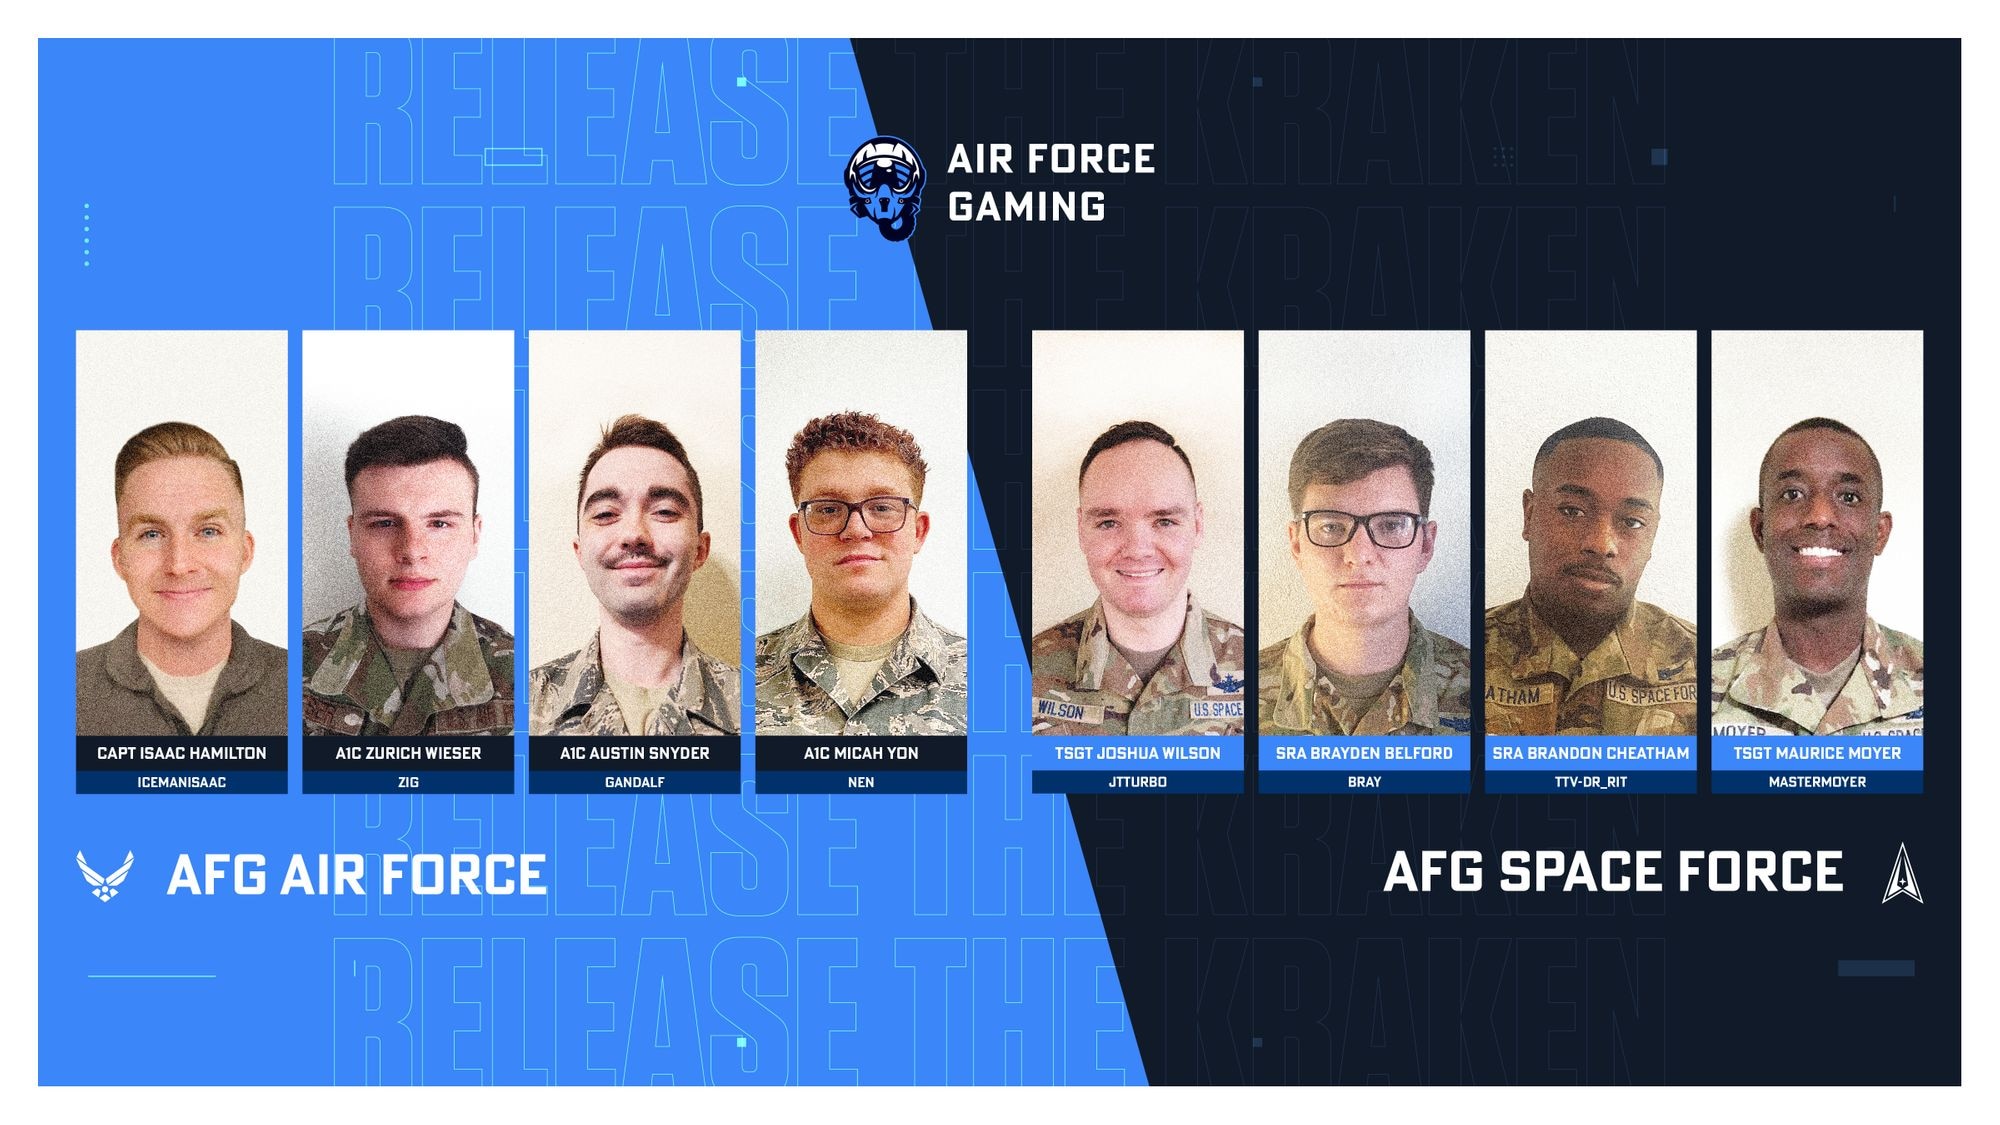 ir Force Gaming made its official debut on 11 November, under the Air Force Services Center with a new intramural e-sports program.